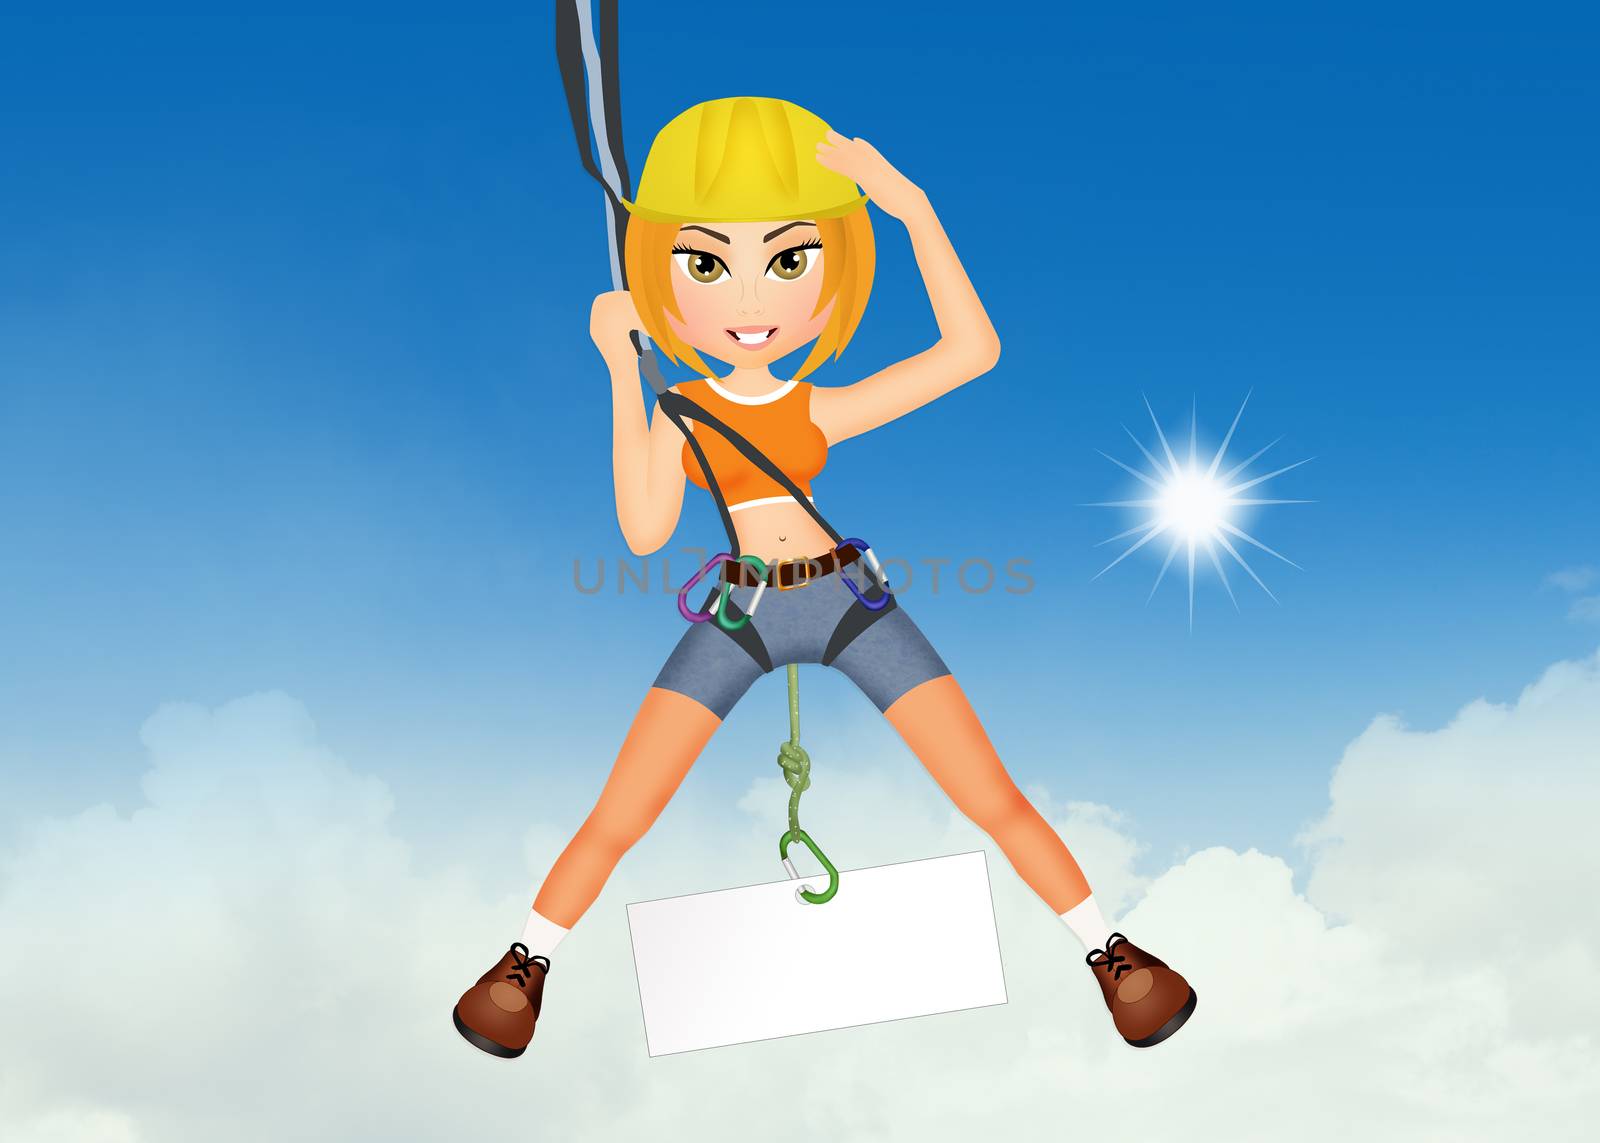 illustration of girl climber on the wall